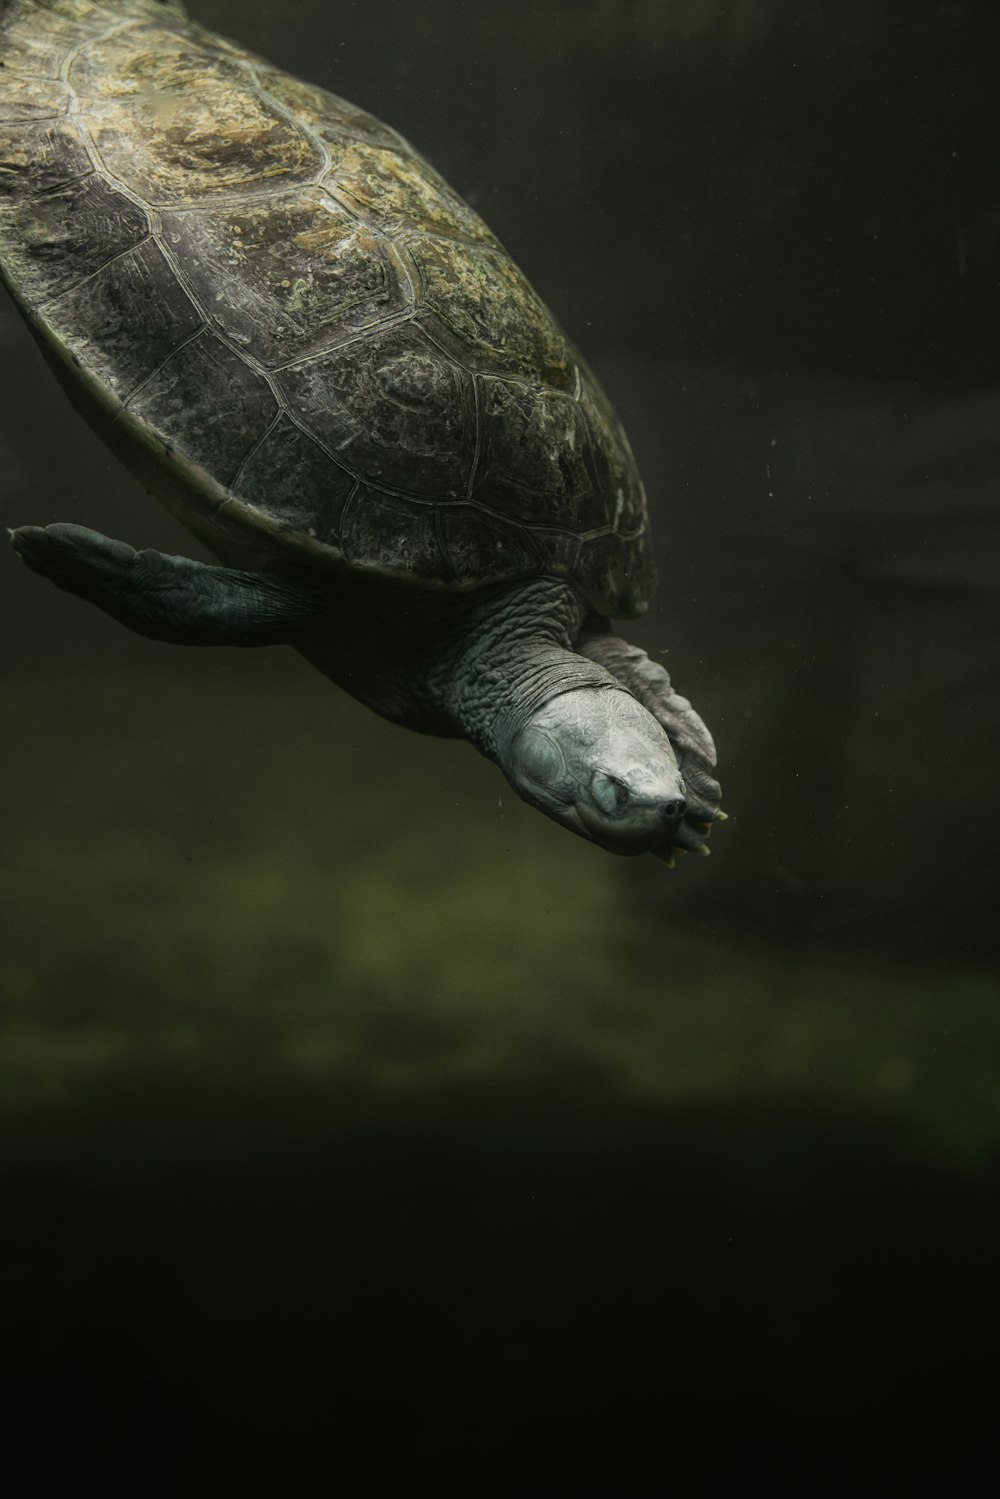 a large turtle swimming in the water